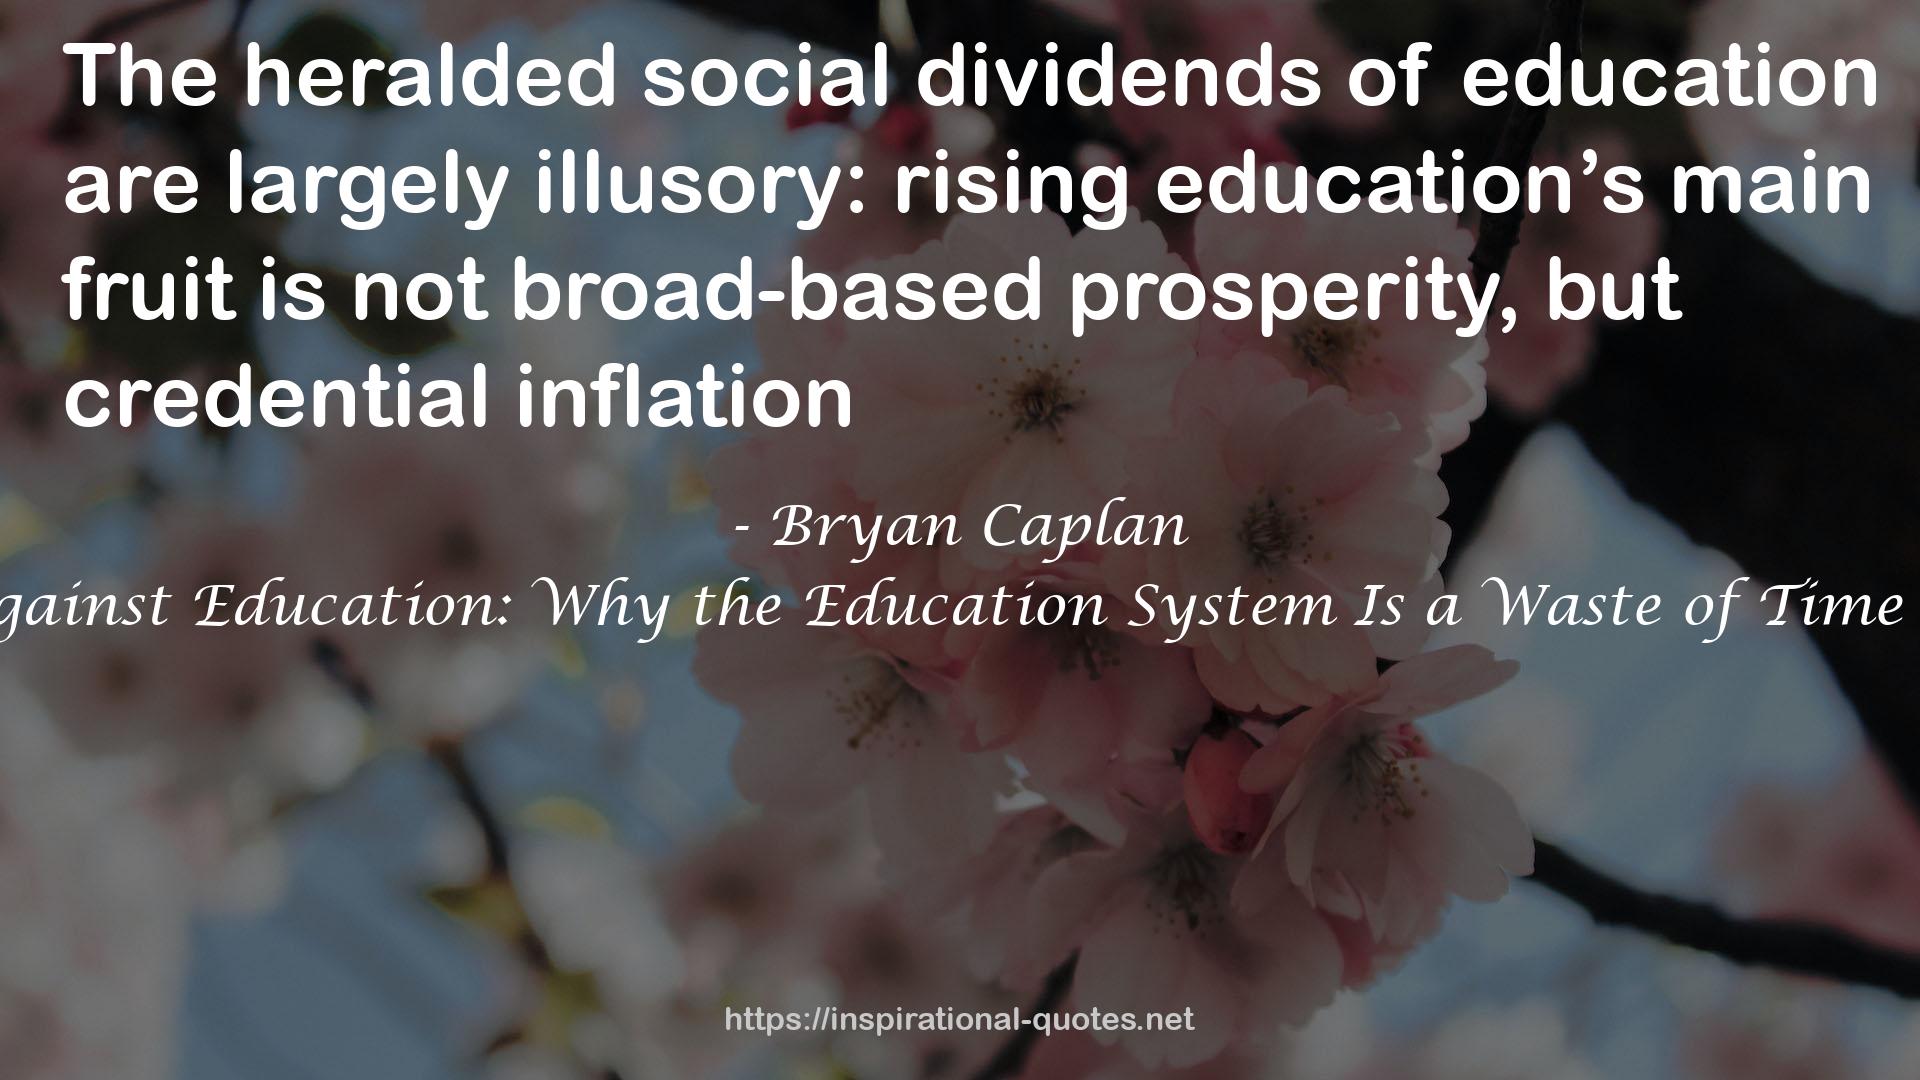 The Case Against Education: Why the Education System Is a Waste of Time and Money QUOTES